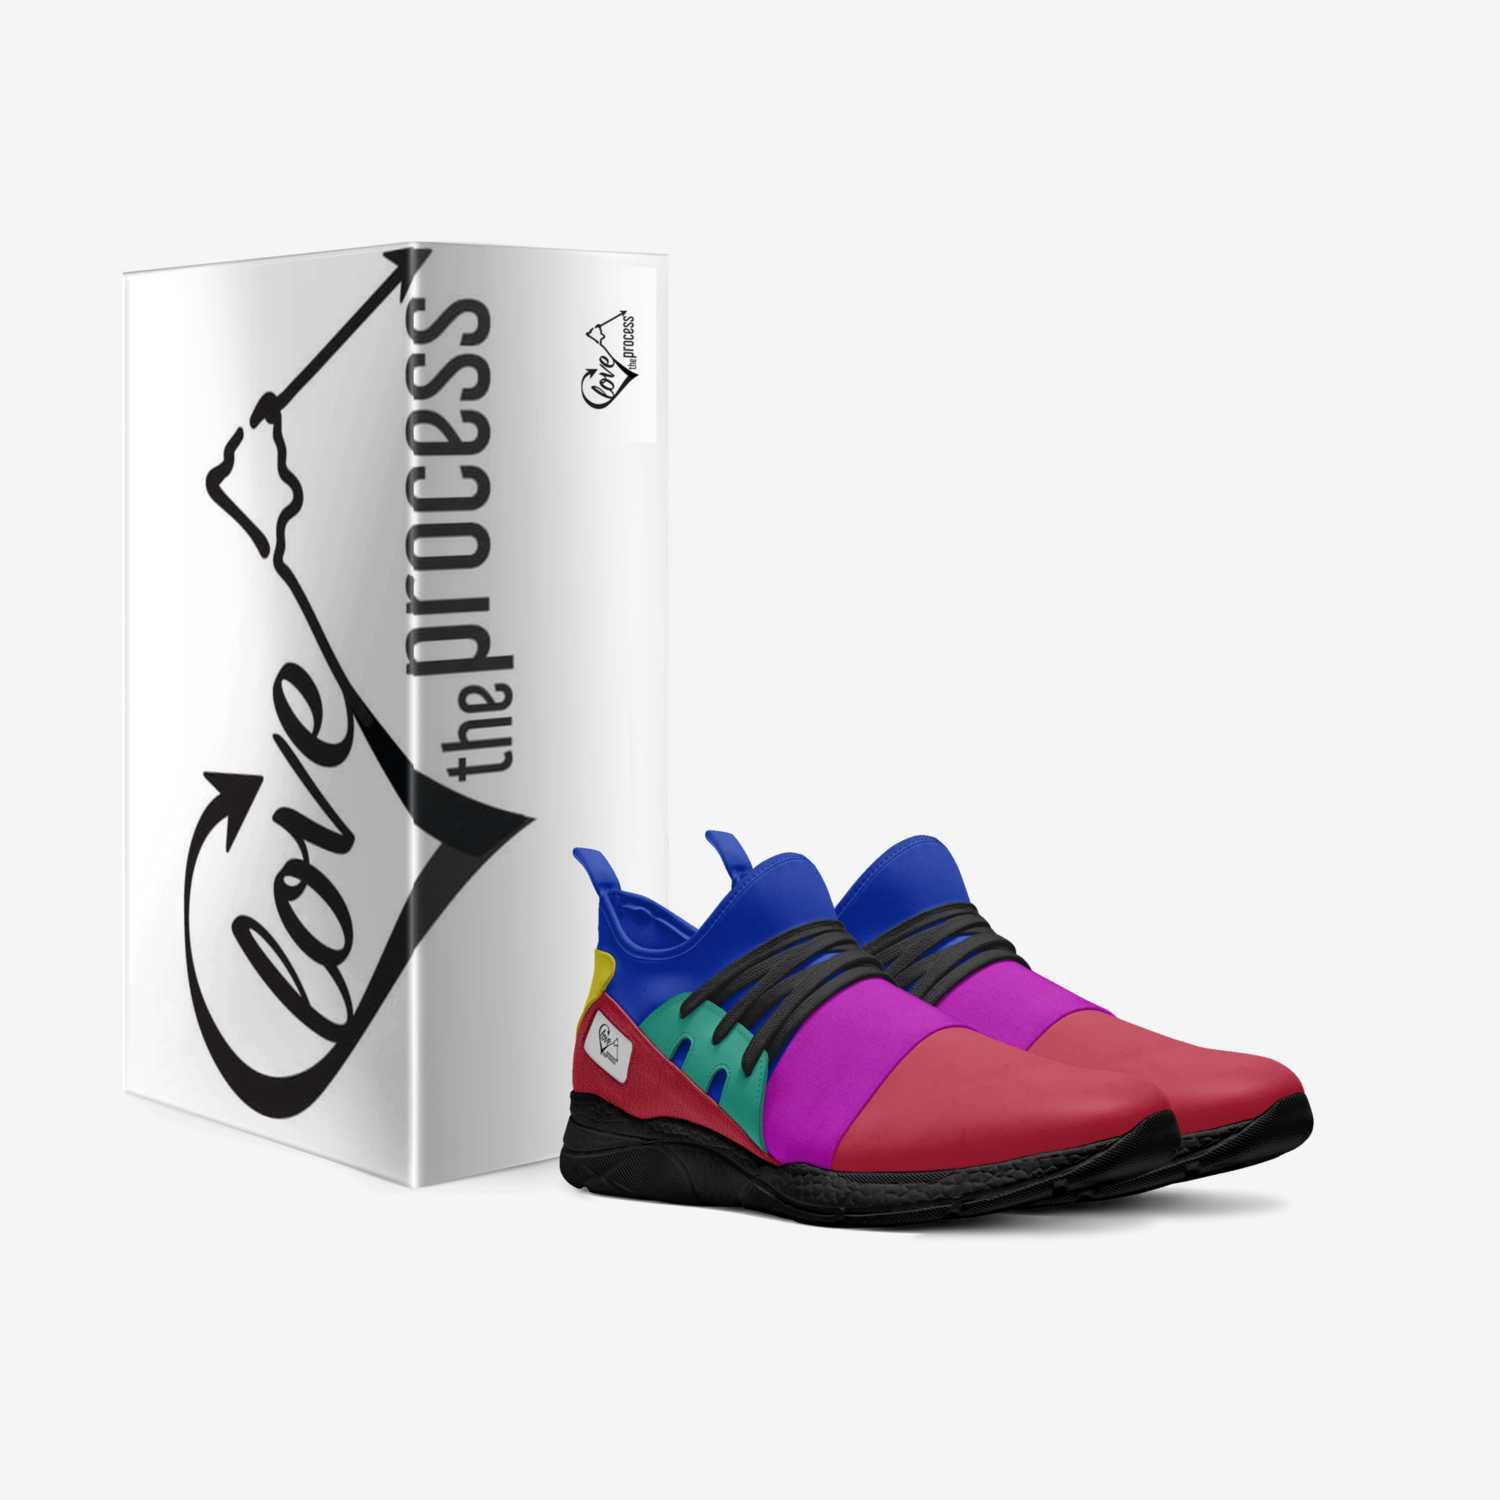 Lopros custom made in Italy shoes by Corey Saunders | Box view